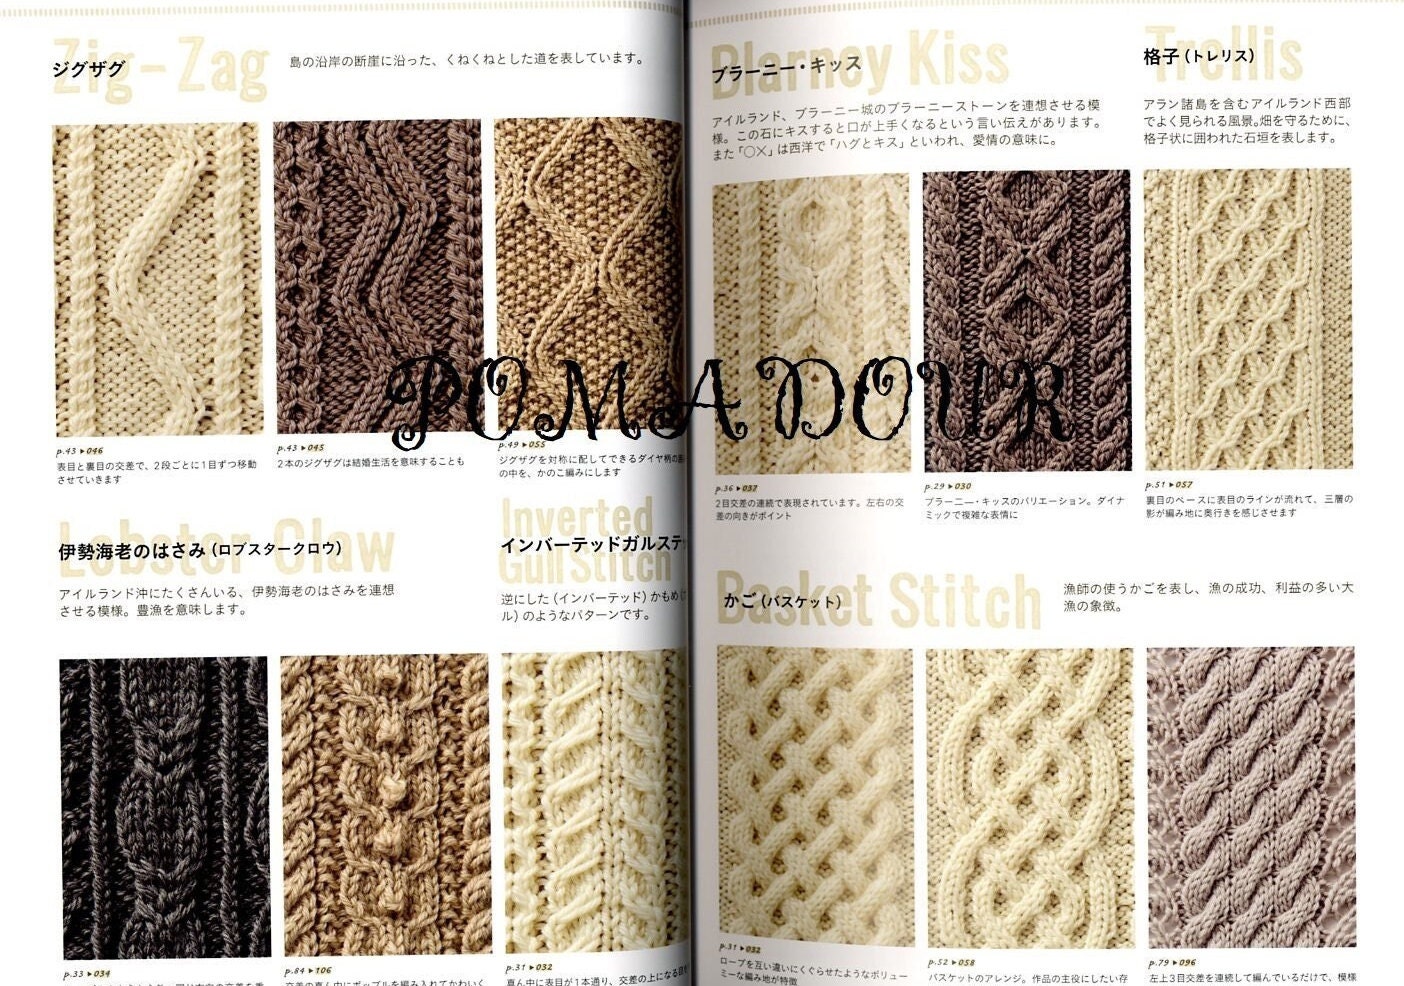 5 Japanese Knitting Pattern Books I Want - Sew in Love